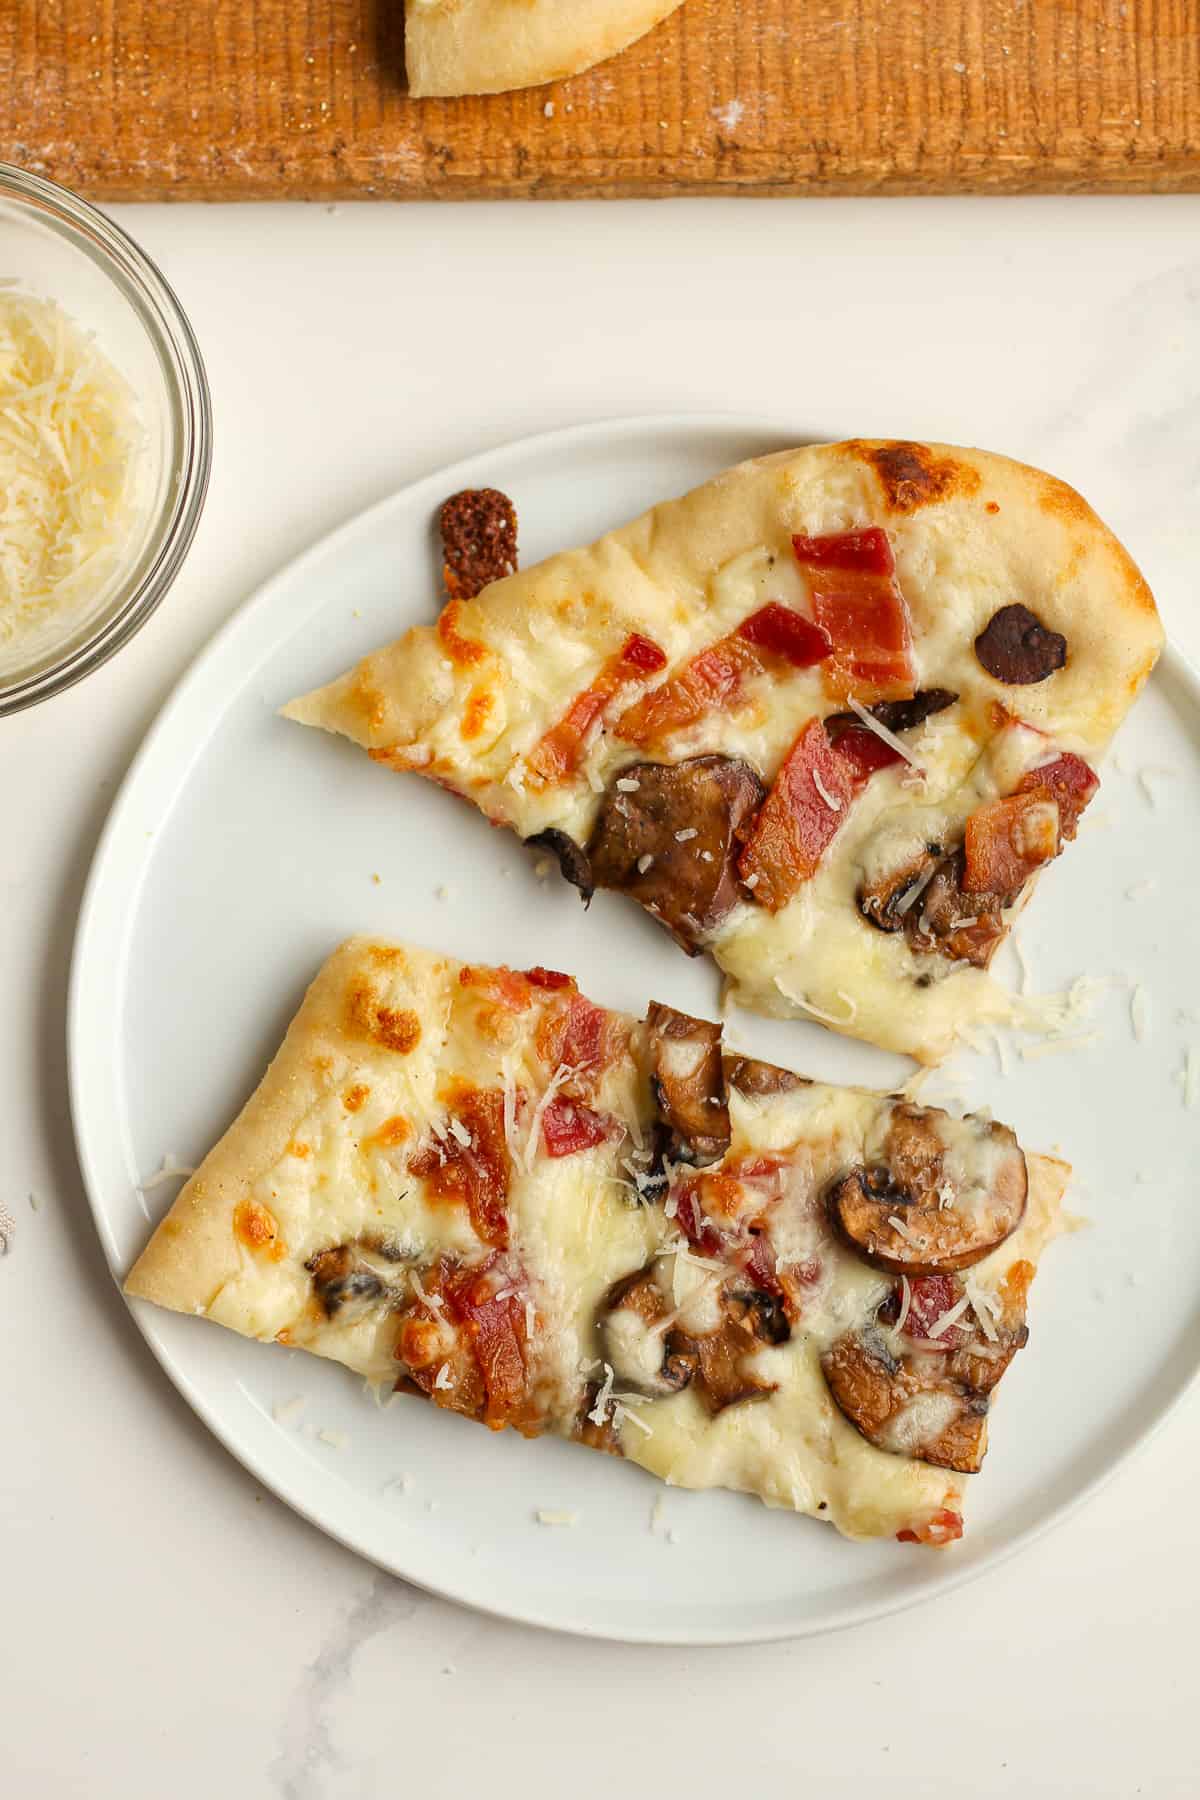 Two slices of white sauce pizza with bacon and mushrooms.